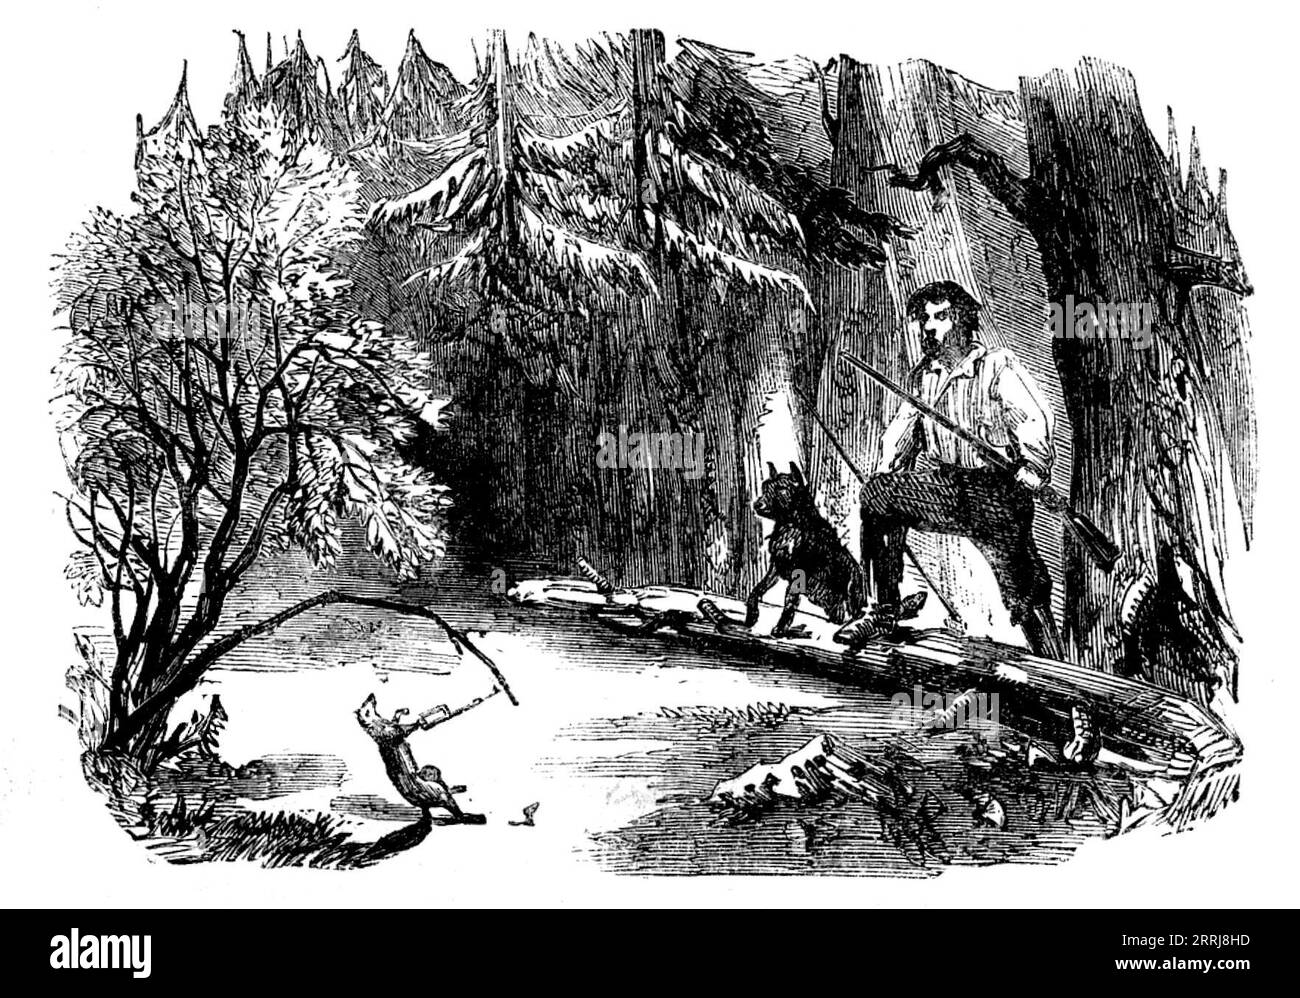 Sporting Scenes in Canada - Round the Traps, 1858. '...the marten is perhaps the most valuable of the animals sought after ; but in trapping for him a great variety of others of the furry tribes fall into the snare...The trapper bends down a stiff sapling, fastening it slightly to the ground by means of a notched peg. To the top of the sapling he affixes the trap with a thong, sets it, and, haying covered it slightly with leaves, scatters some offal of venison or any kind of meat about...The marten or comer of whatsoever kind, in tugging about at the bait, inevitably springs the trap, and, at Stock Photo